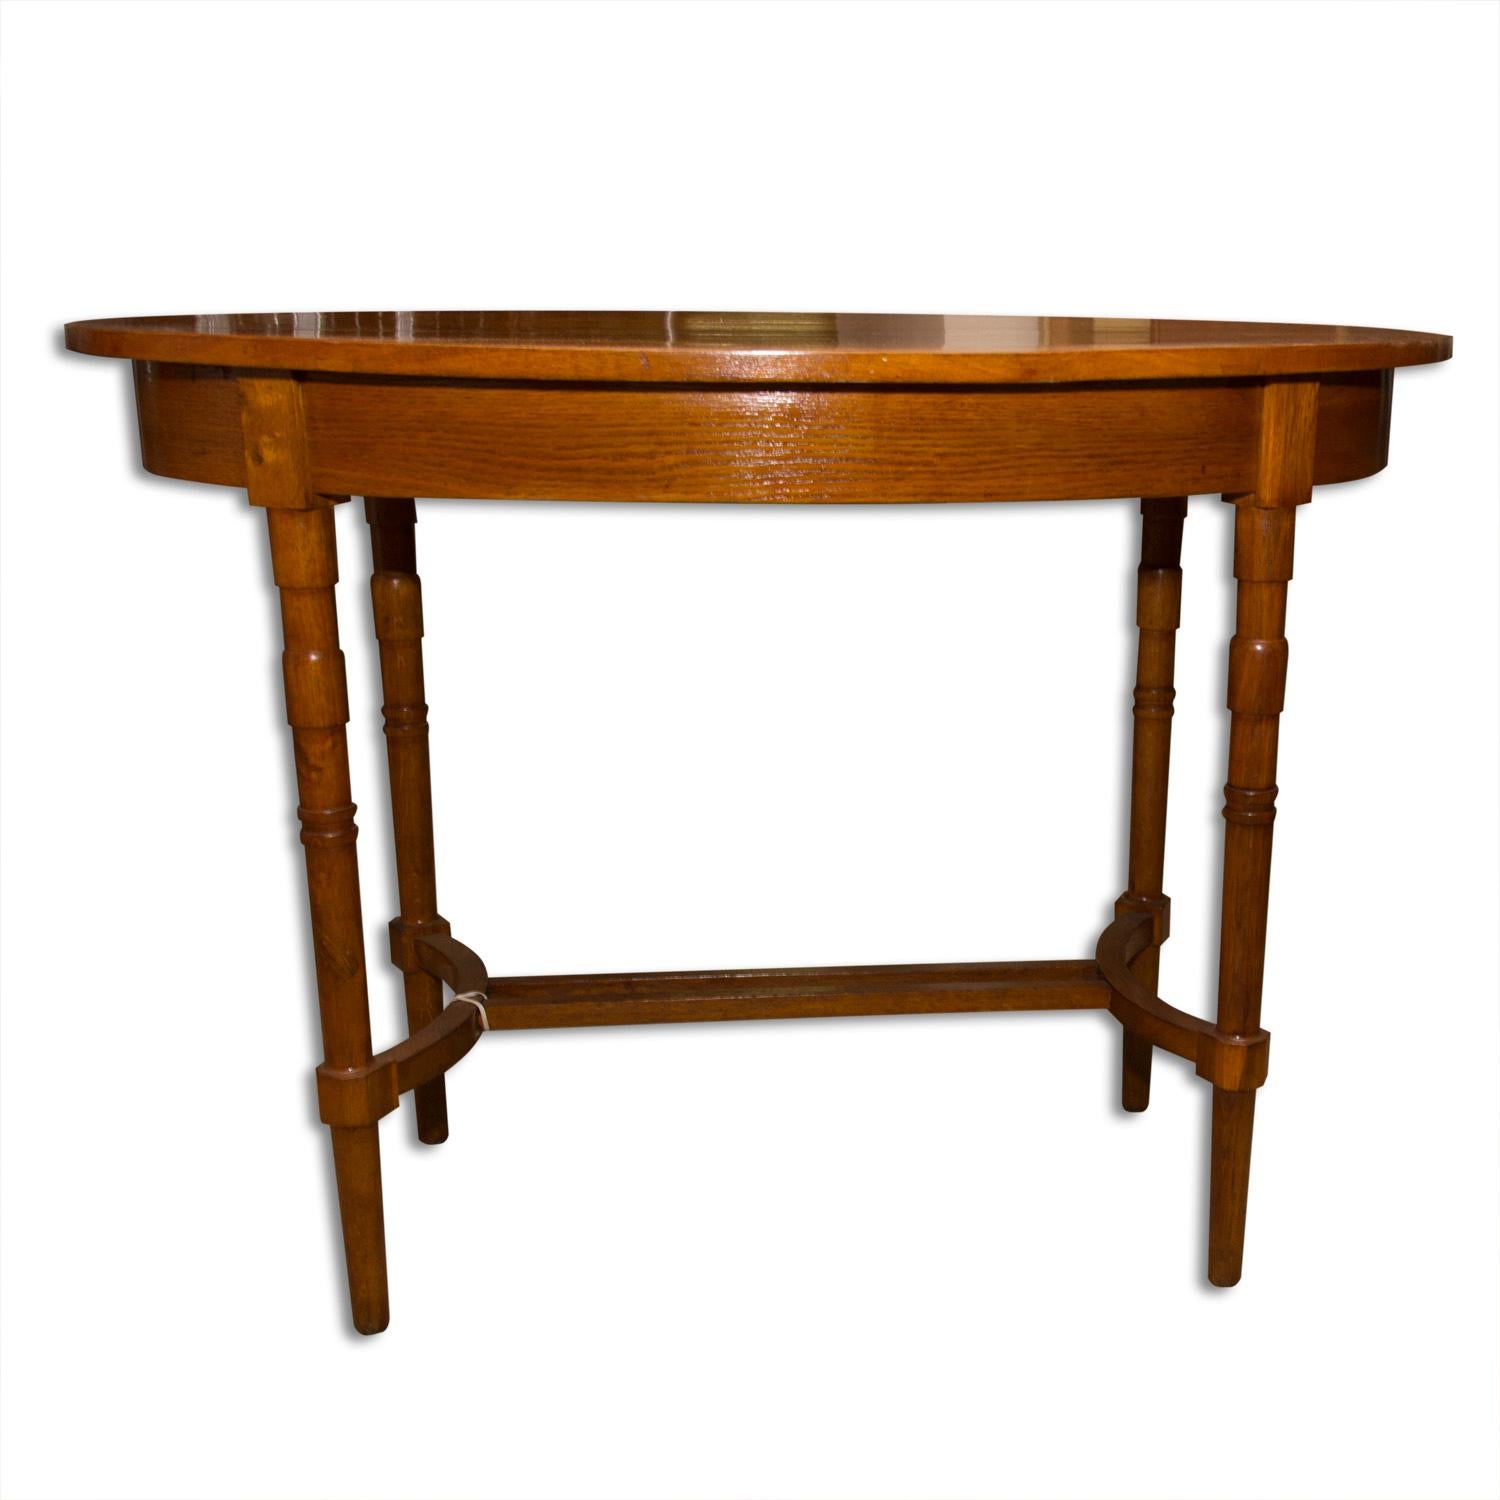 This oval occasional table was designed and produced in Austria-Hungary, circa 1915. It was made of oakwood. The table is completely refurbished and varnished to a high gloss.